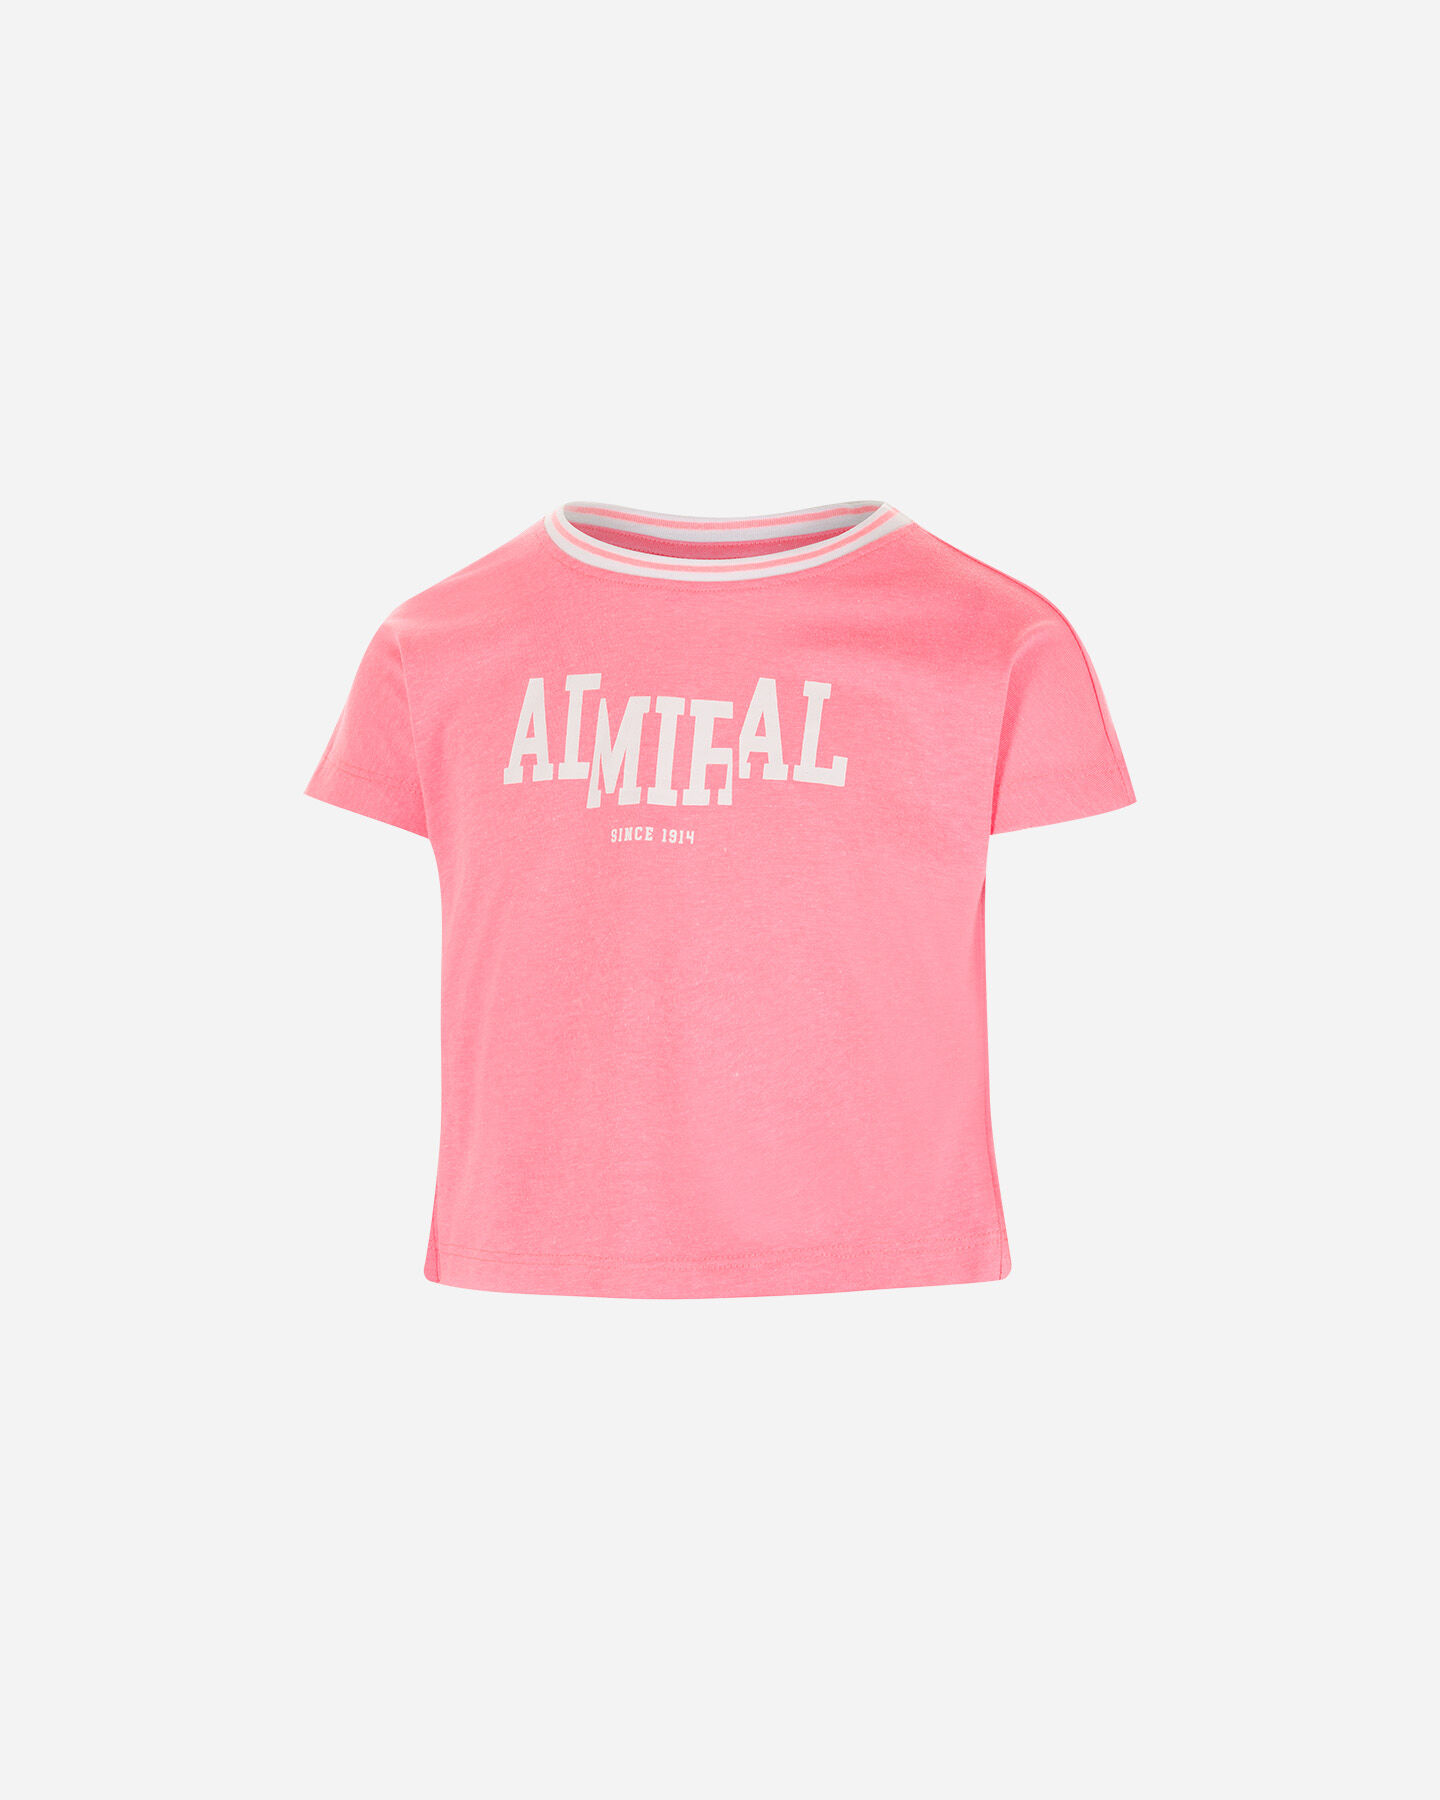  T-Shirt ADMIRAL BASIC SPORT JR S4101125|987|4A scatto 0